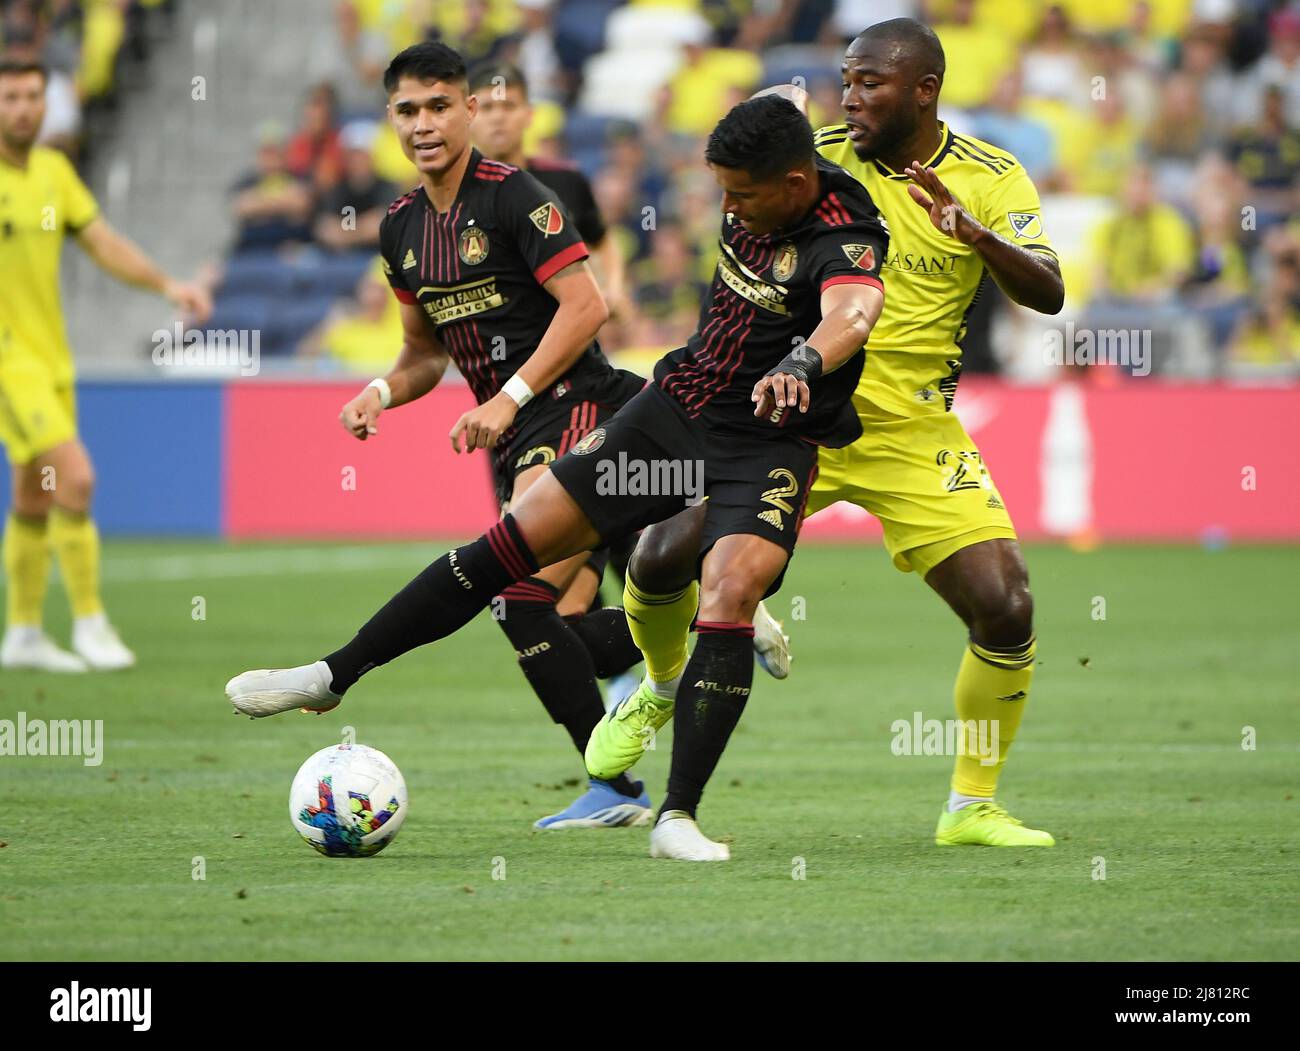 Nashville SC, May 11, 2022: May 11, 2022: Atlanta United defender Ronald HernÃ¡ndez (2) steals the ball from Nashville SC midfielder Brian Anunga (27) during an MLS game between Atlanta United and Nashville SC at Geodis Park in Nashville TN Steve Roberts/CSM Stock Photo